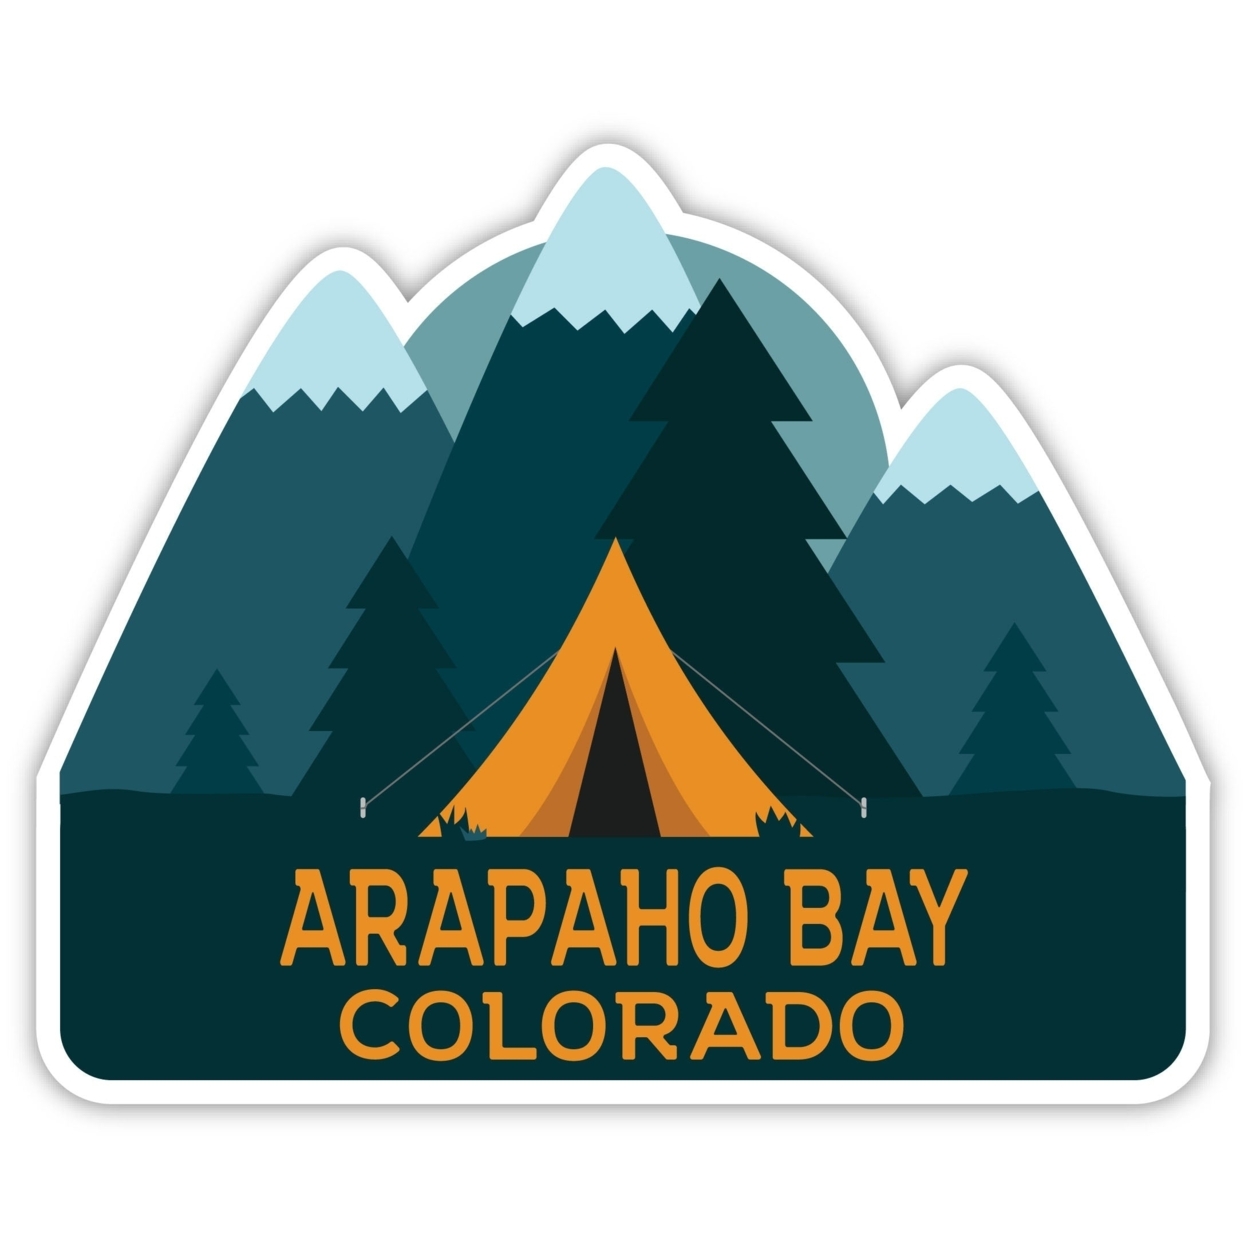 Arapaho Bay Colorado Souvenir Decorative Stickers (Choose Theme And Size) - 4-Pack, 8-Inch, Tent